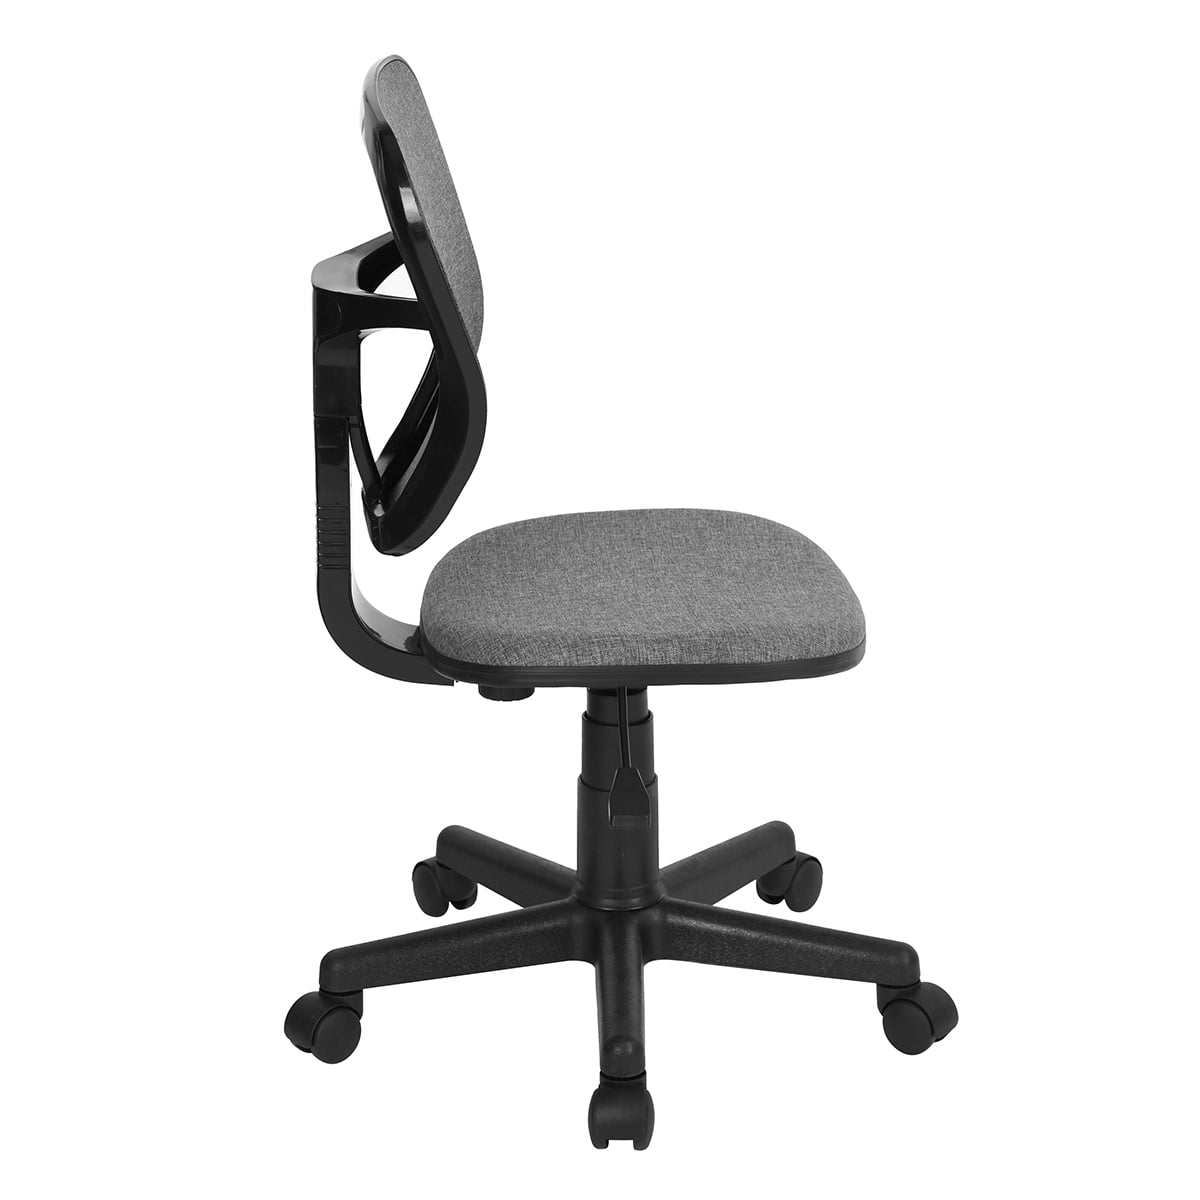 FurnitureR Task Chair wivel Adjustable Mesh Office Chair ...